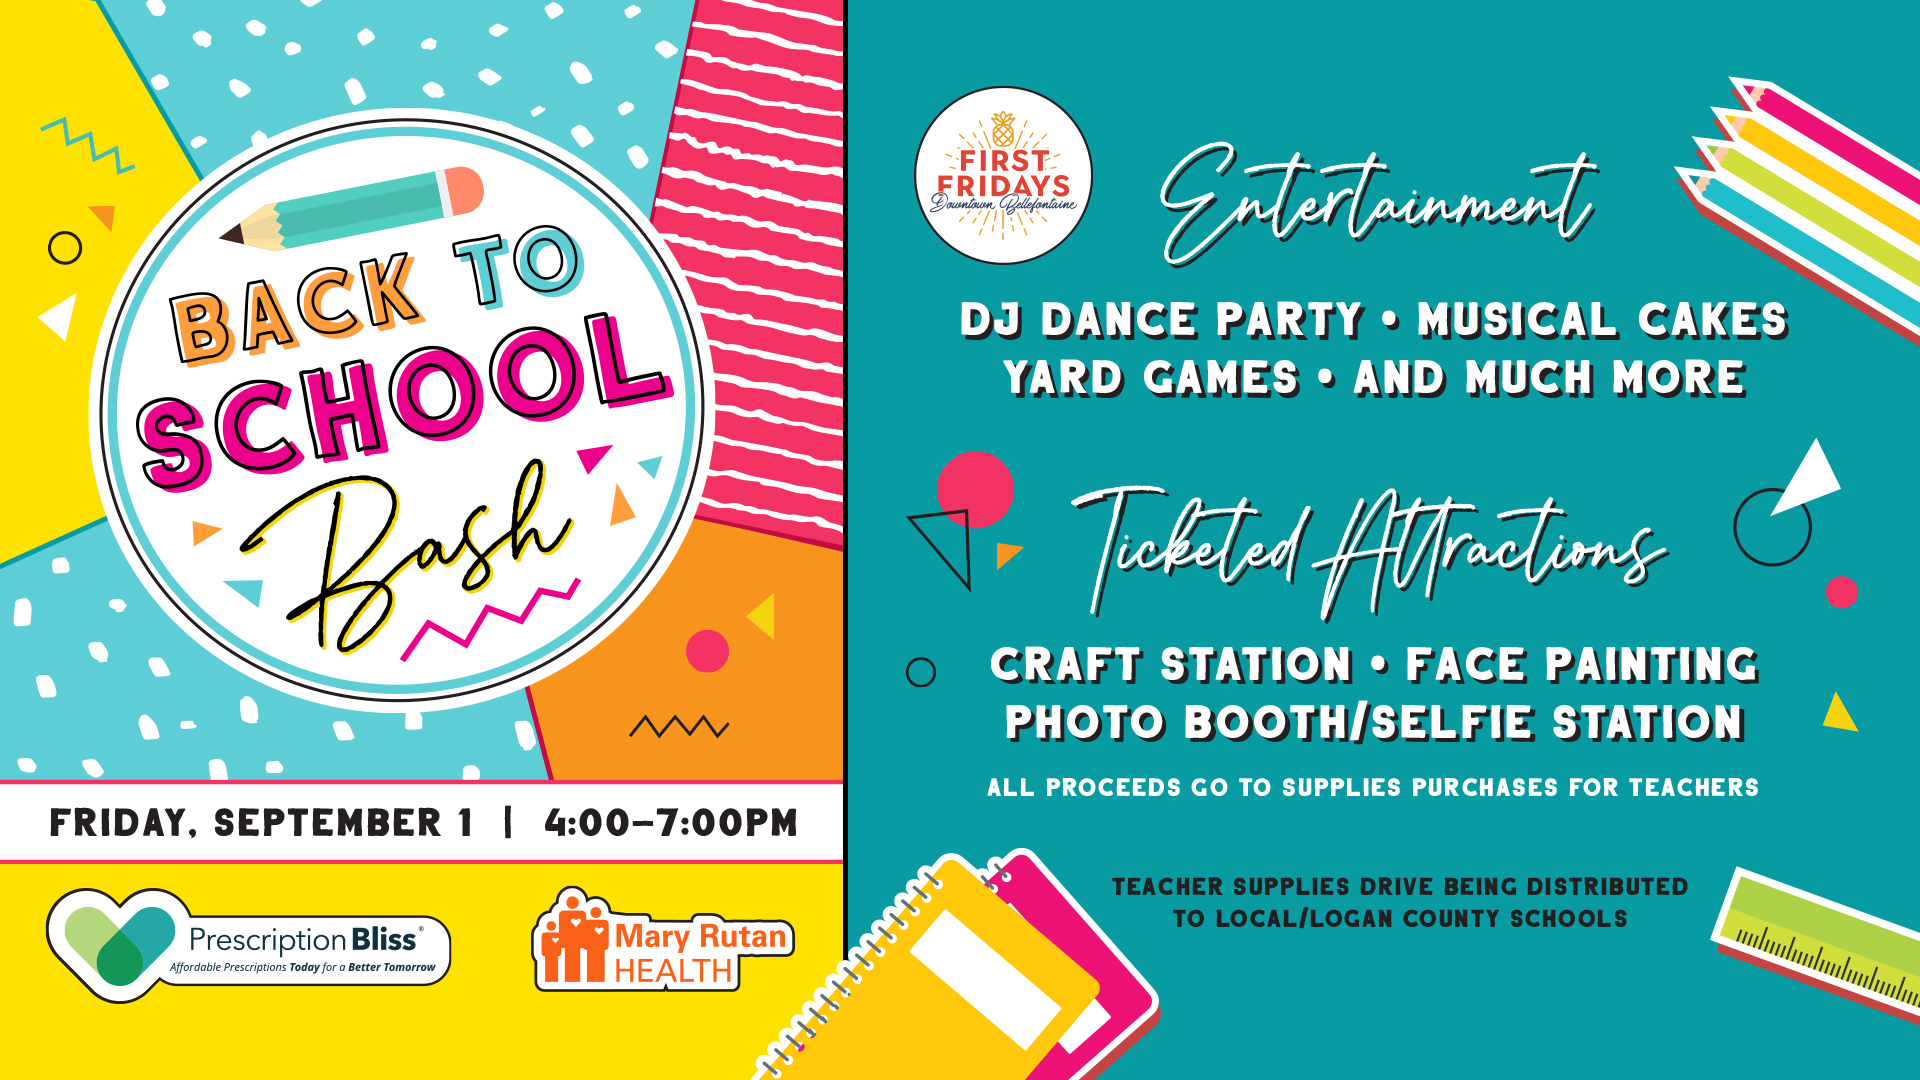 Fall into First Friday Fun – September’s Back to School Bash